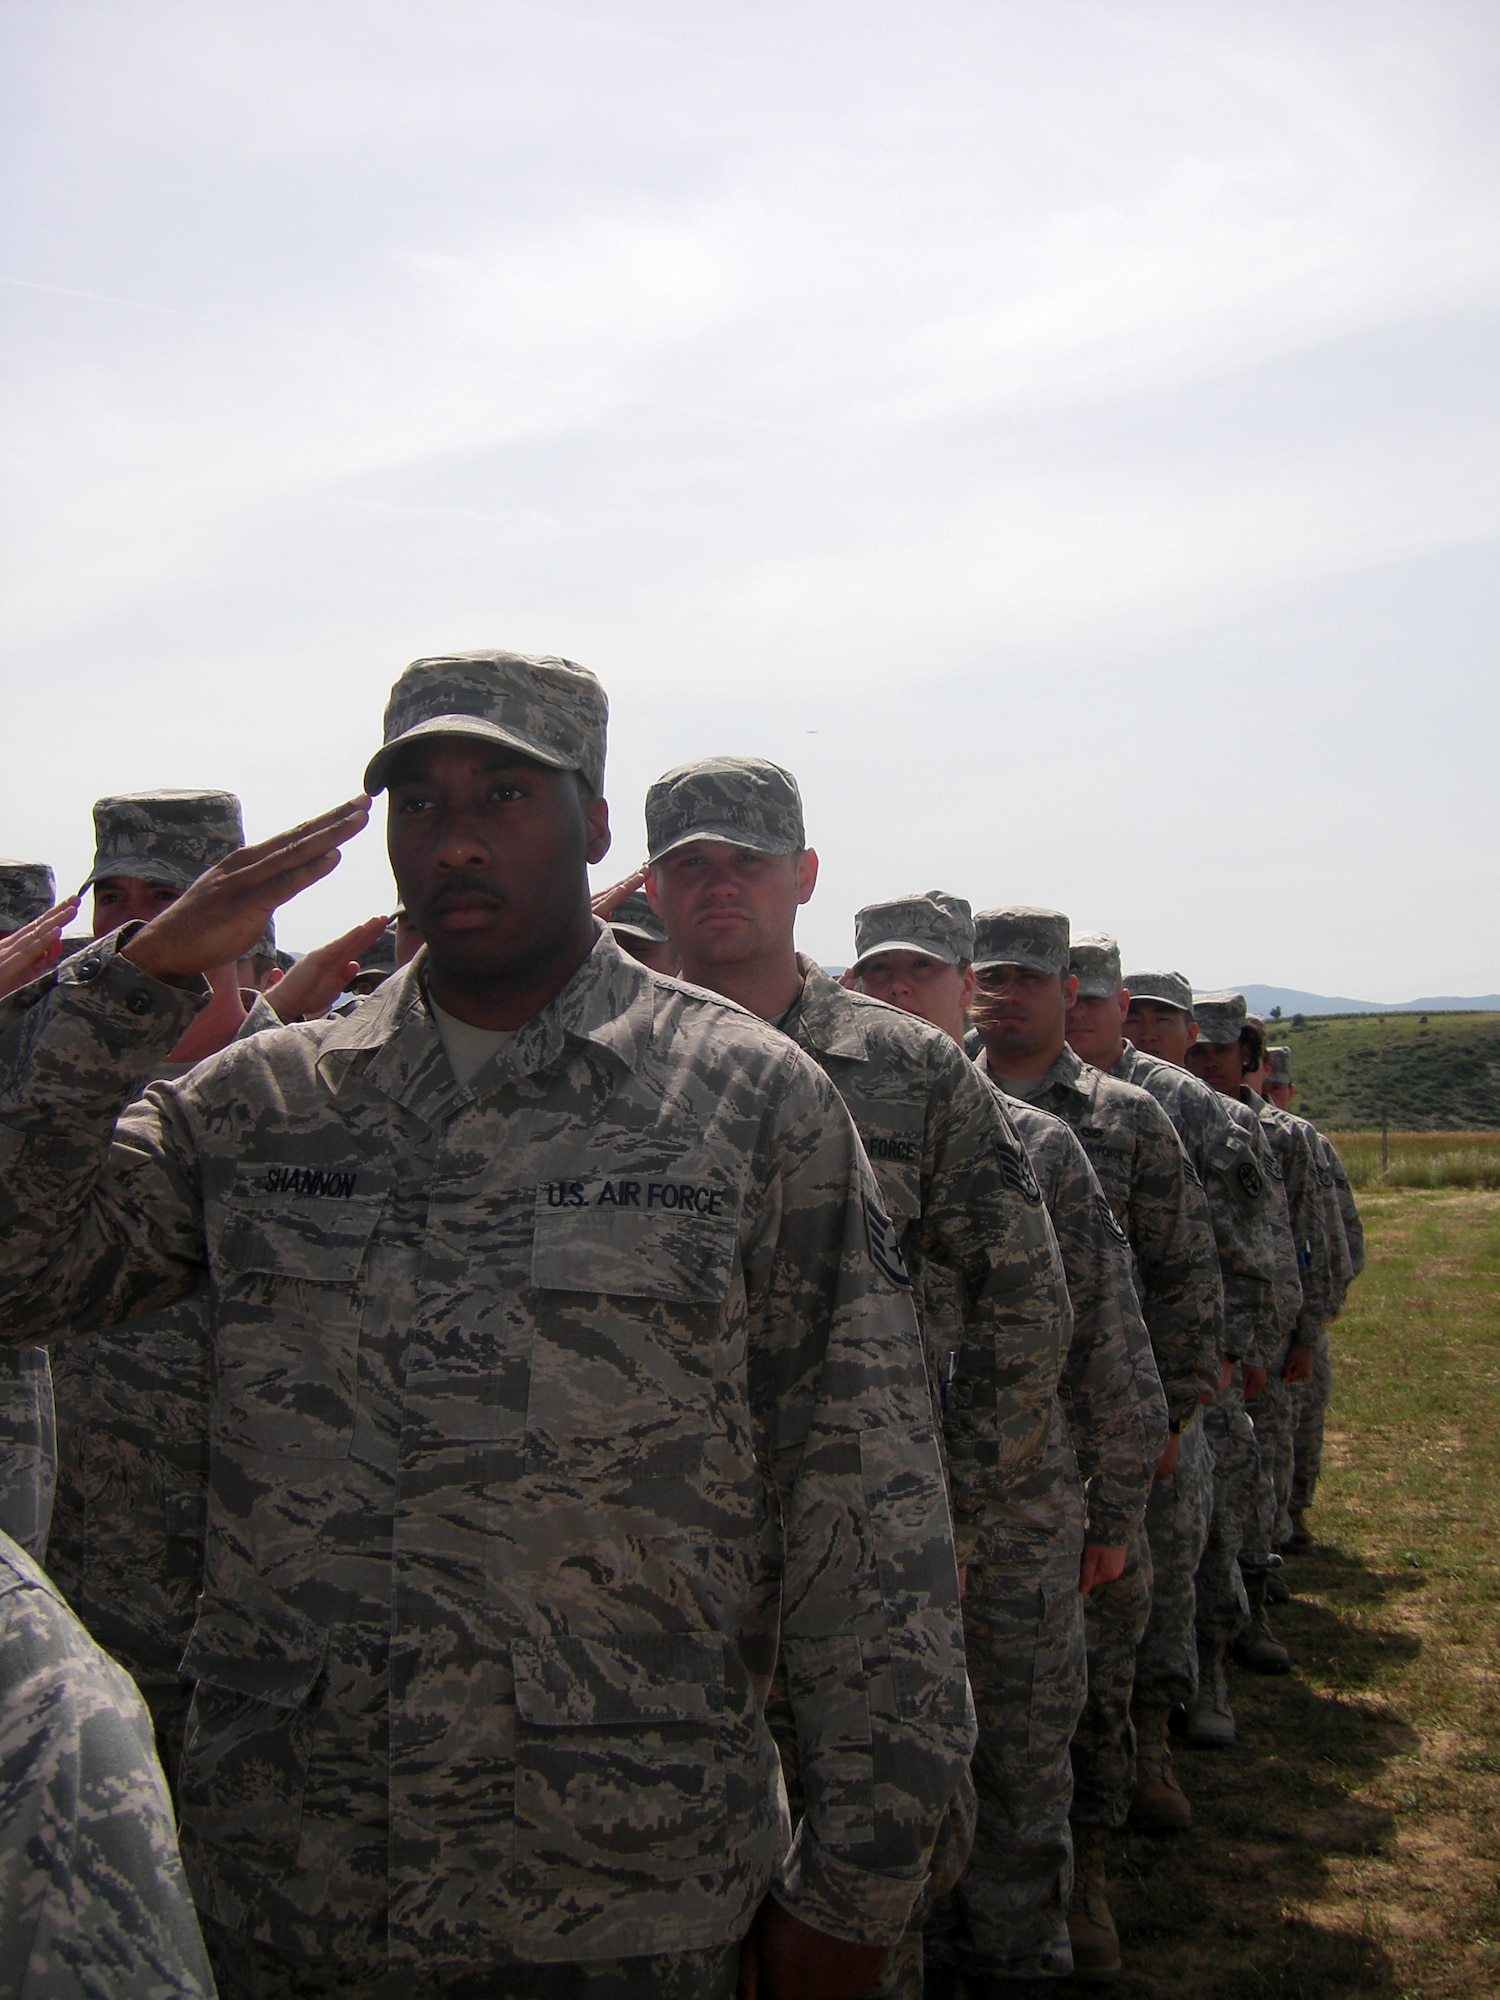 CAMP PEPELISHTE, Macedonia -- Members of the United States Air Force and Army salute during the Macedonian and American National Anthems at the opening ceremony of Medical Training Exercise in Central and Eastern Europe 2011 here June 6.  The countries participating in this year’s MEDCEUR are Macedonia, Montenegro, Bosnia and Herzegovina, Serbia, Slovenia, Norway and the United States.  MEDCEUR is a Partnership for Peace and Chairman of the Joint Chiefs of Staff-sponsored regional and multilateral exercise in Central and Eastern Europe designed to provide medical training and operational experience in a deployed environment.  (U.S. Air Force photo/Master Sgt. Kelley J. Stewart)